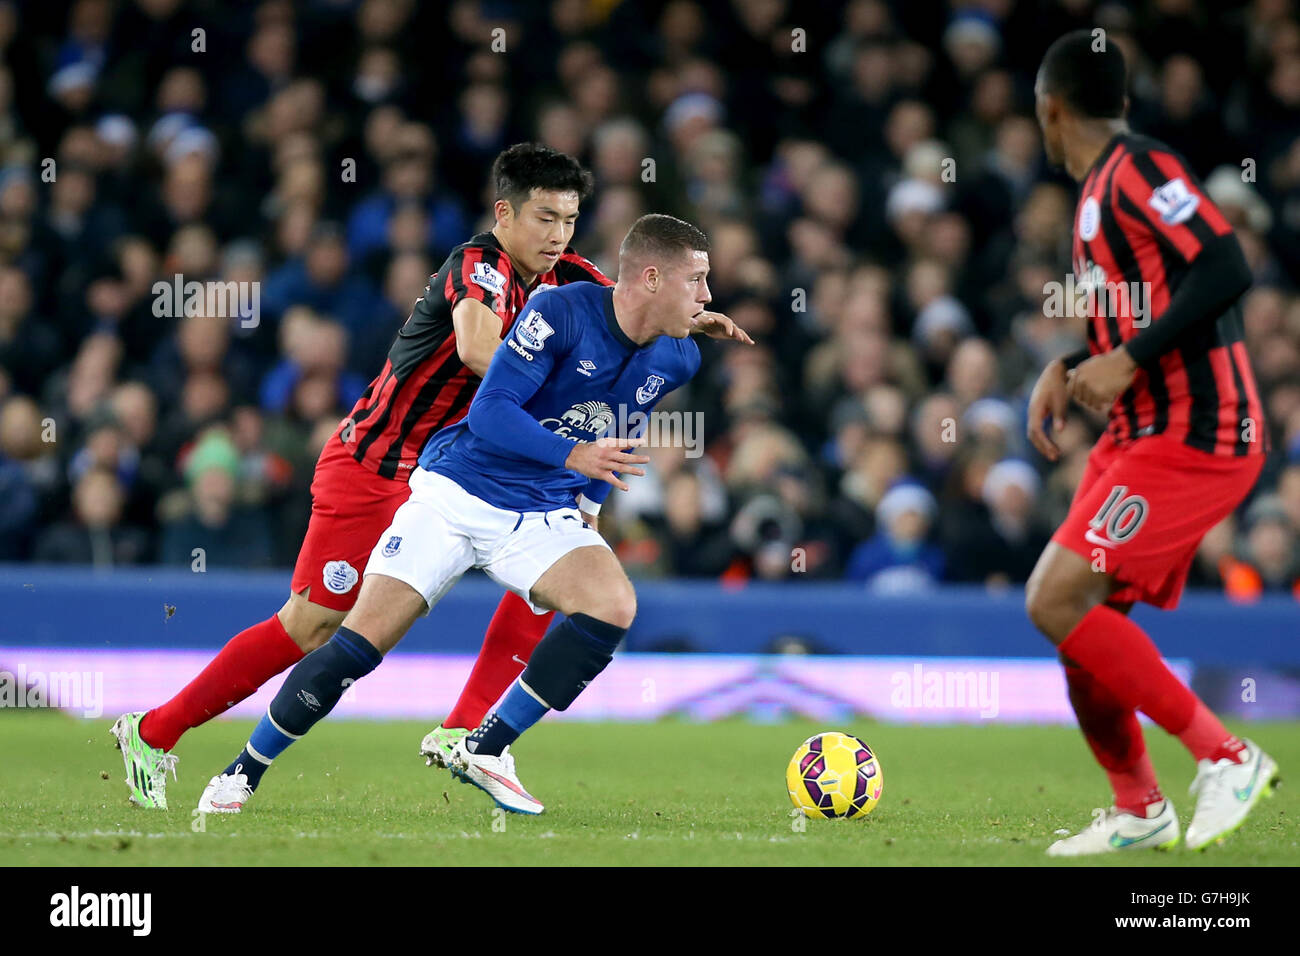 Everton's Ross Barkley (centre) in action with Queens Park Rangers' Yun Suk-Young (left) during the Barclays Premier League match at Goodison Park, Liverpool. Stock Photo